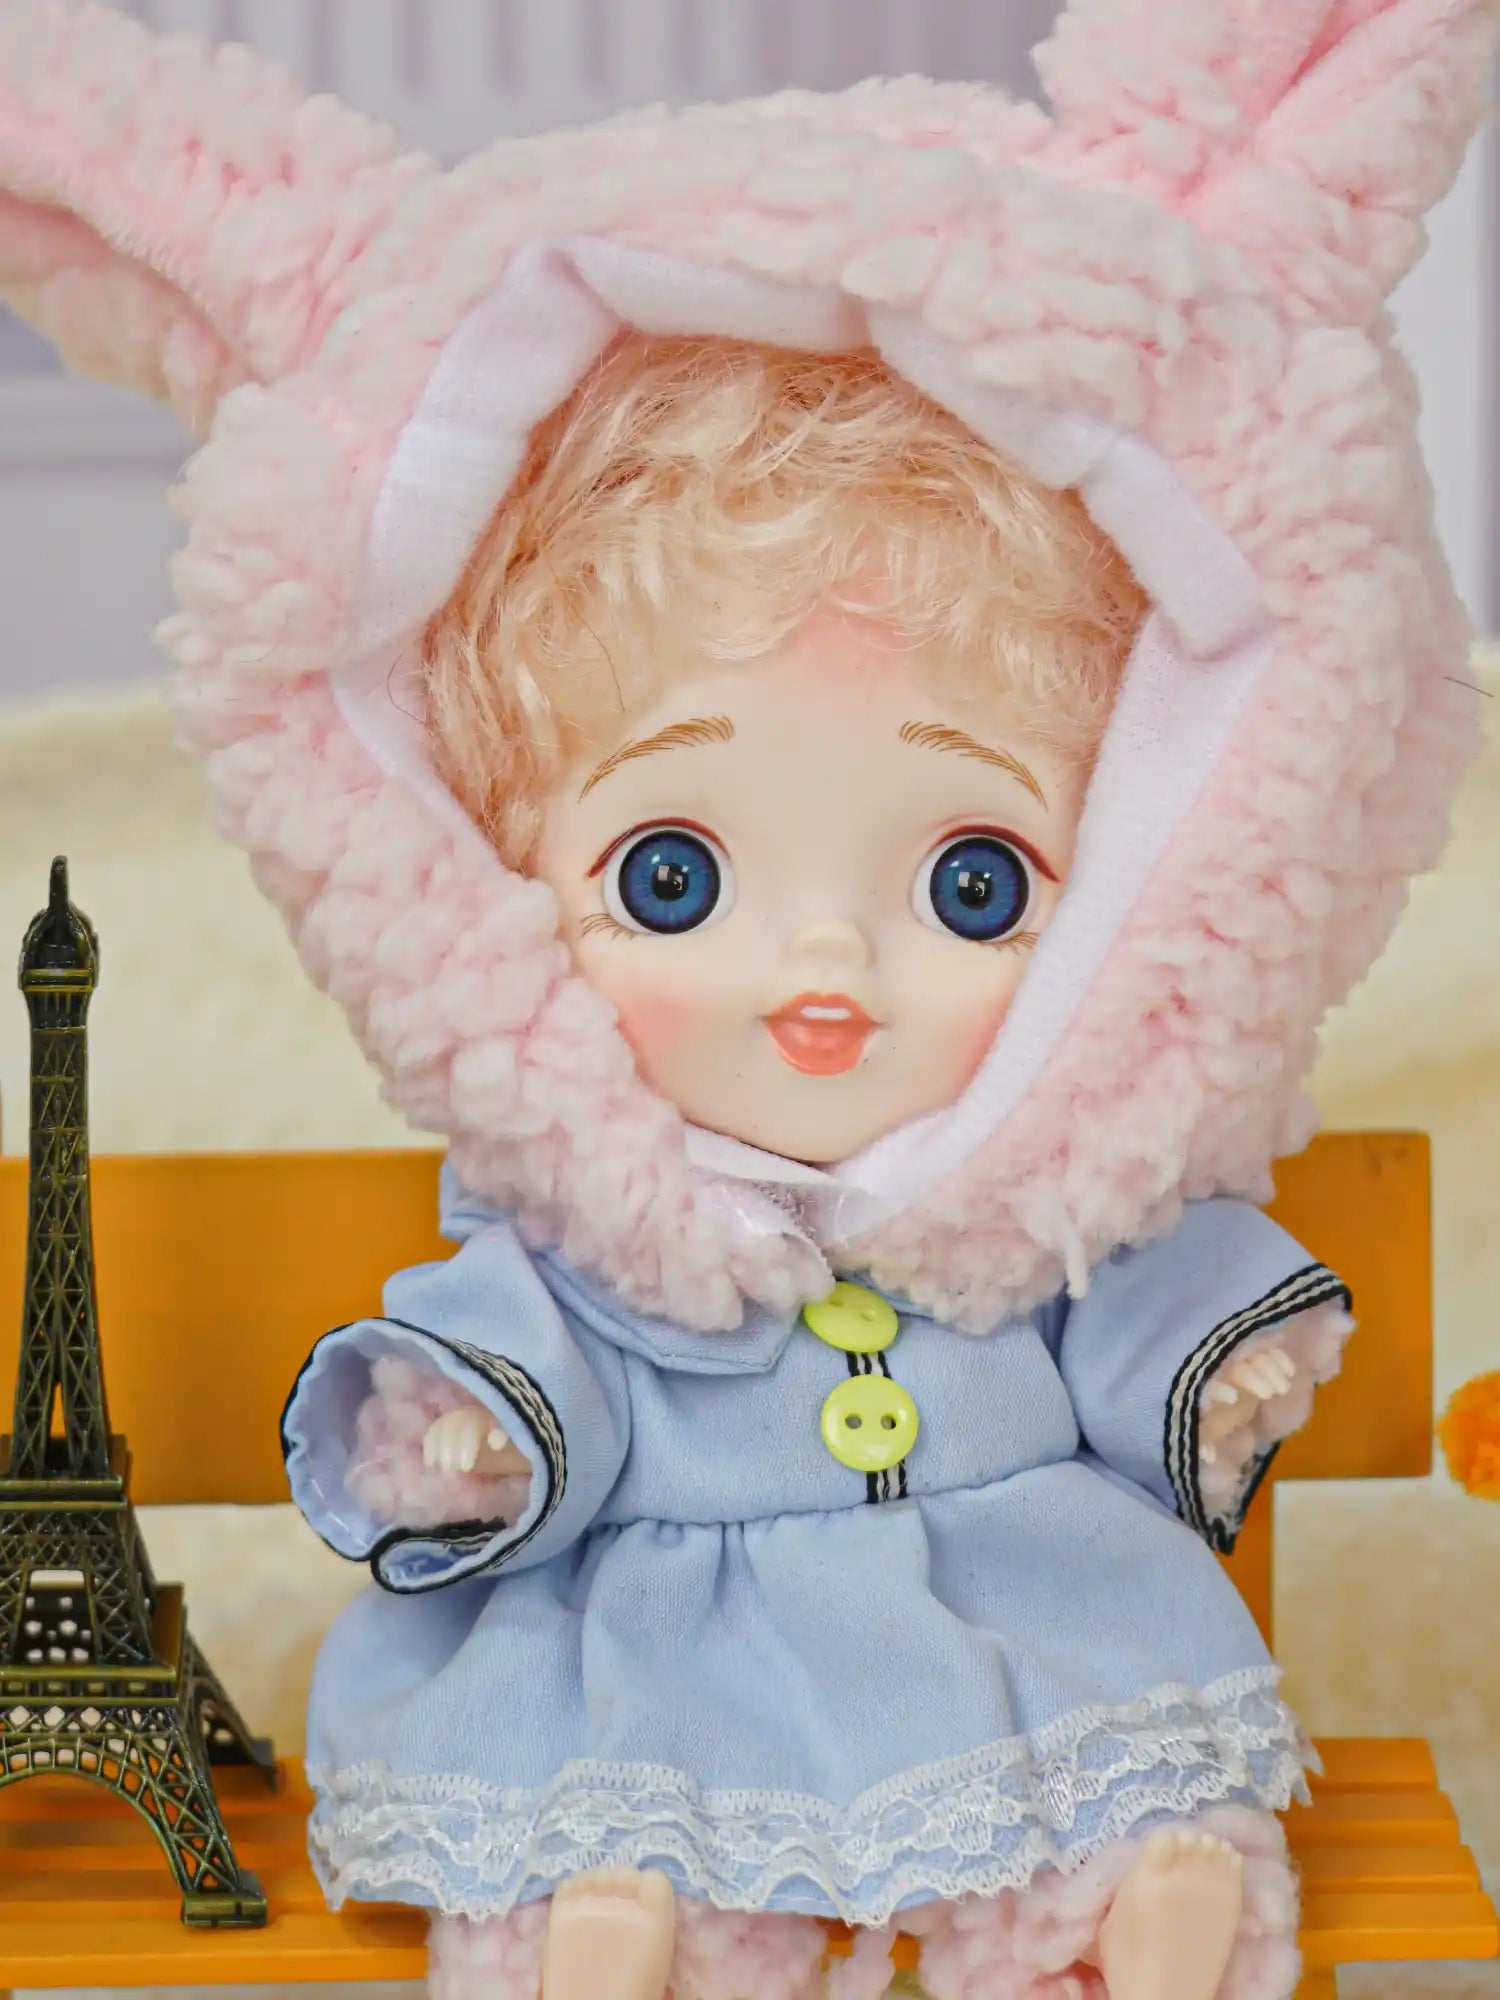 BJD clad in blue with bunny ears, blue eyes, and a tiny Eiffel Tower.